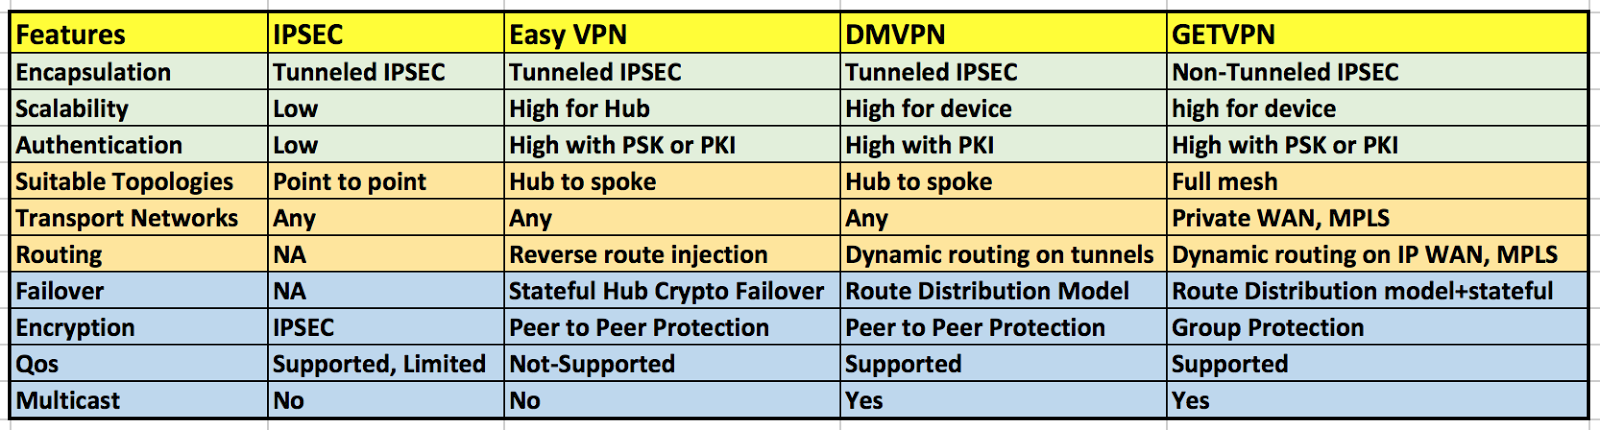 white papers comparing dmvpn and sdn